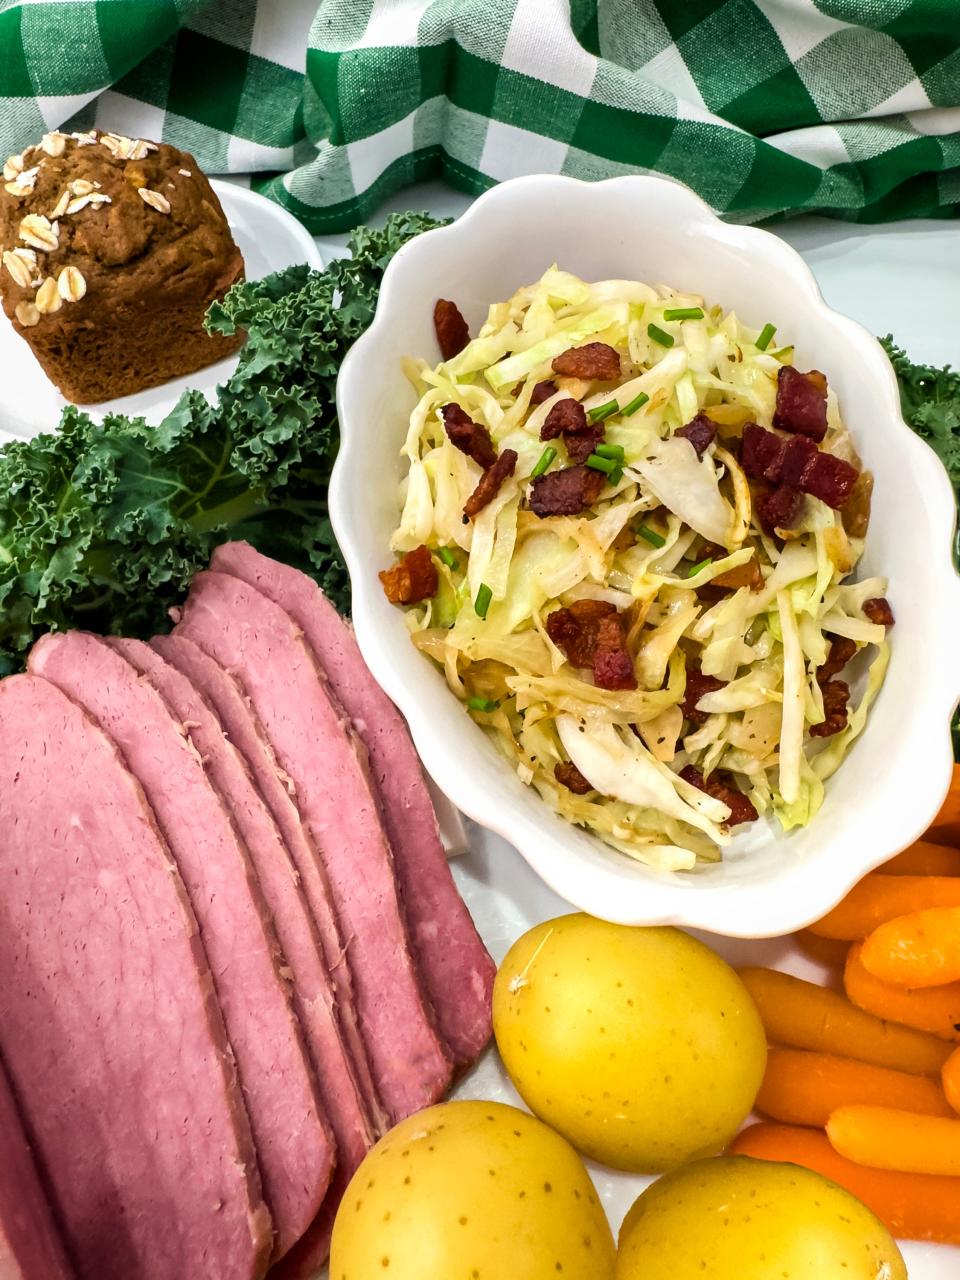 Bring your favorite corned beef and Irish foods together for St. Patrick's Day feasting.